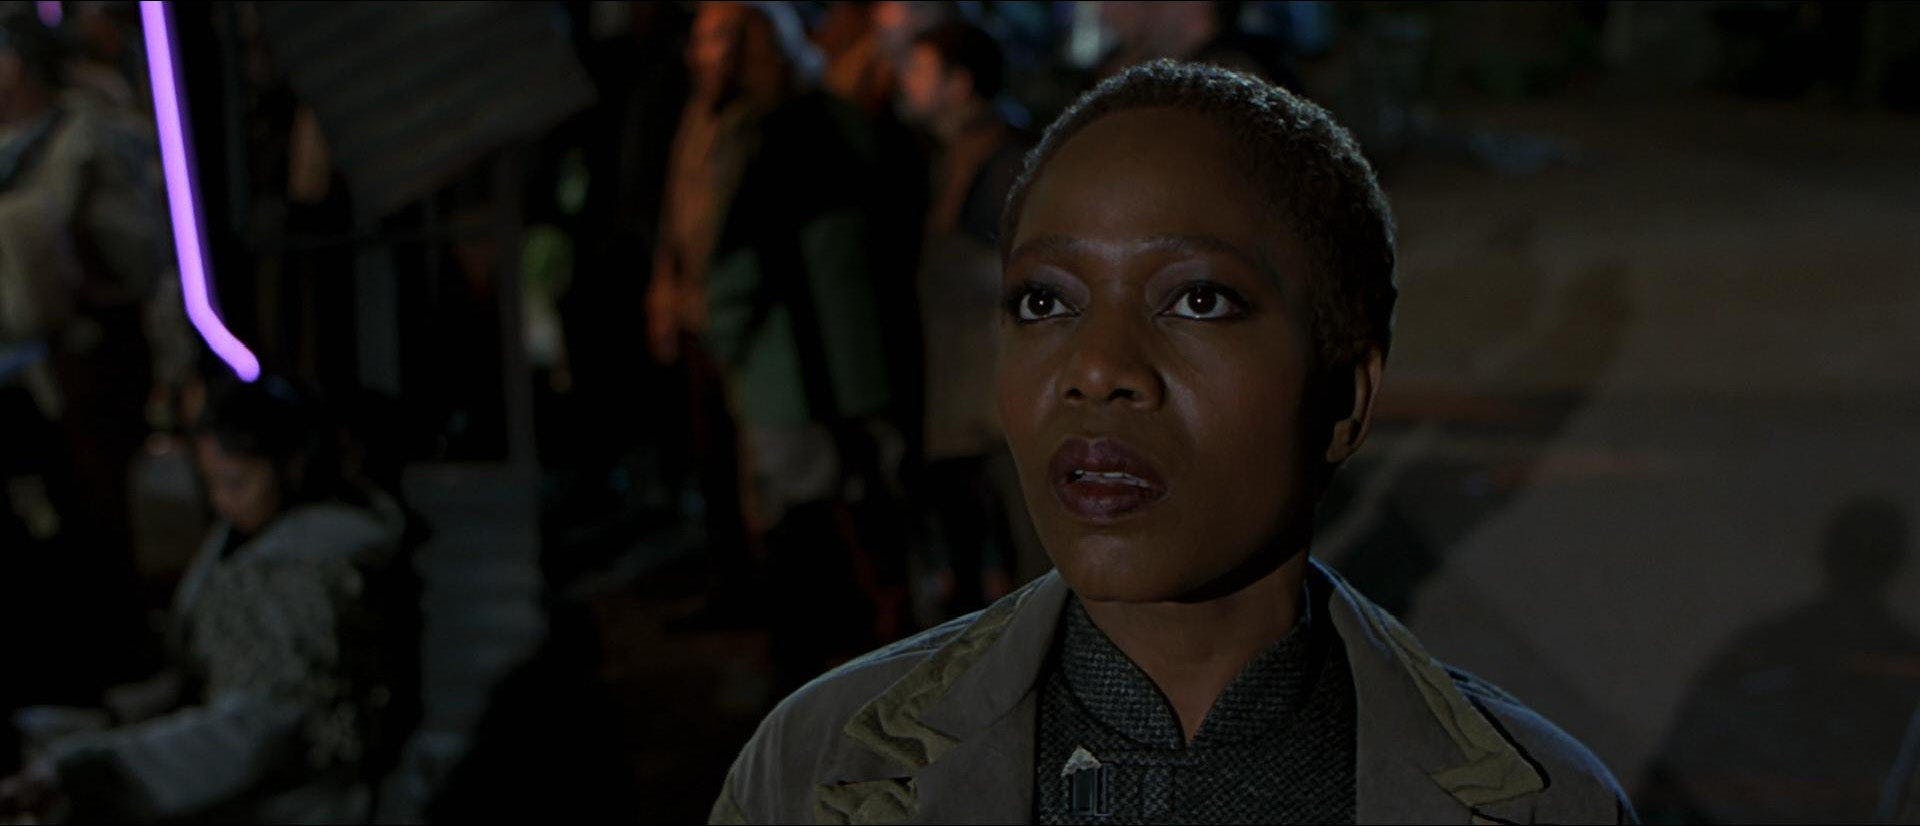 Lily Sloane gazes up at the sky above in Star Trek: First Contact